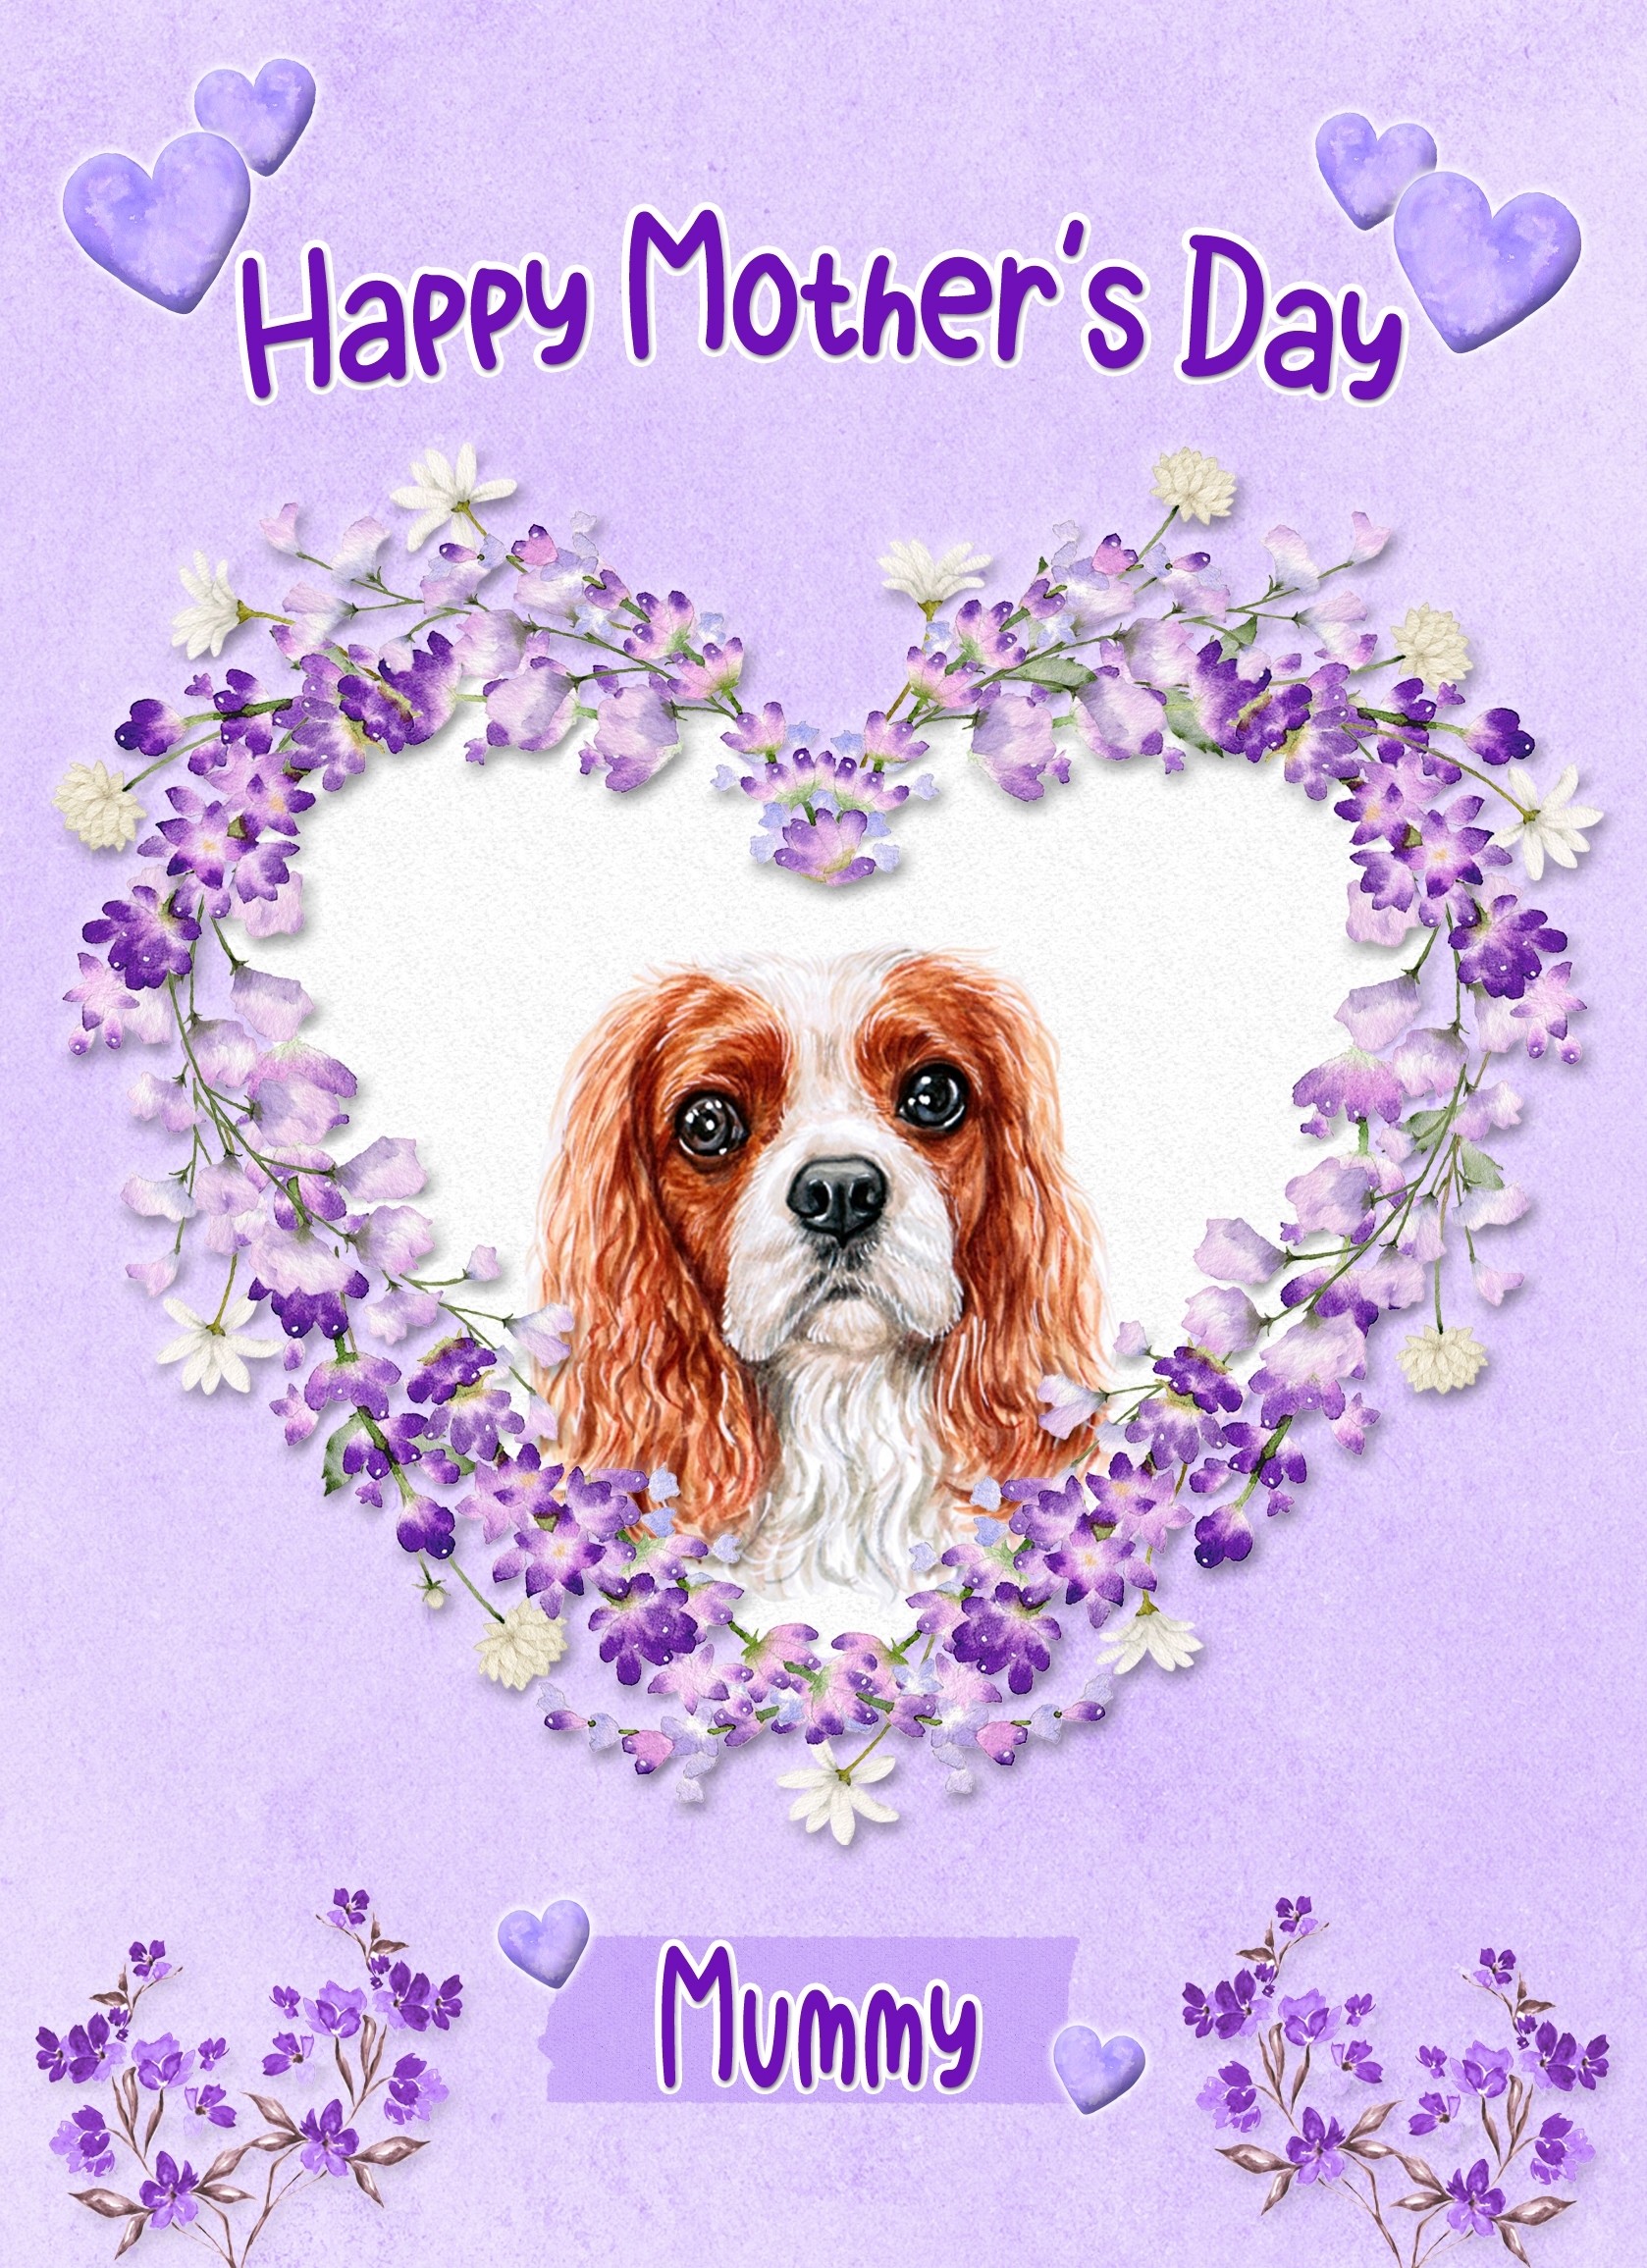 King Charles Spaniel Dog Mothers Day Card (Happy Mothers, Mummy)